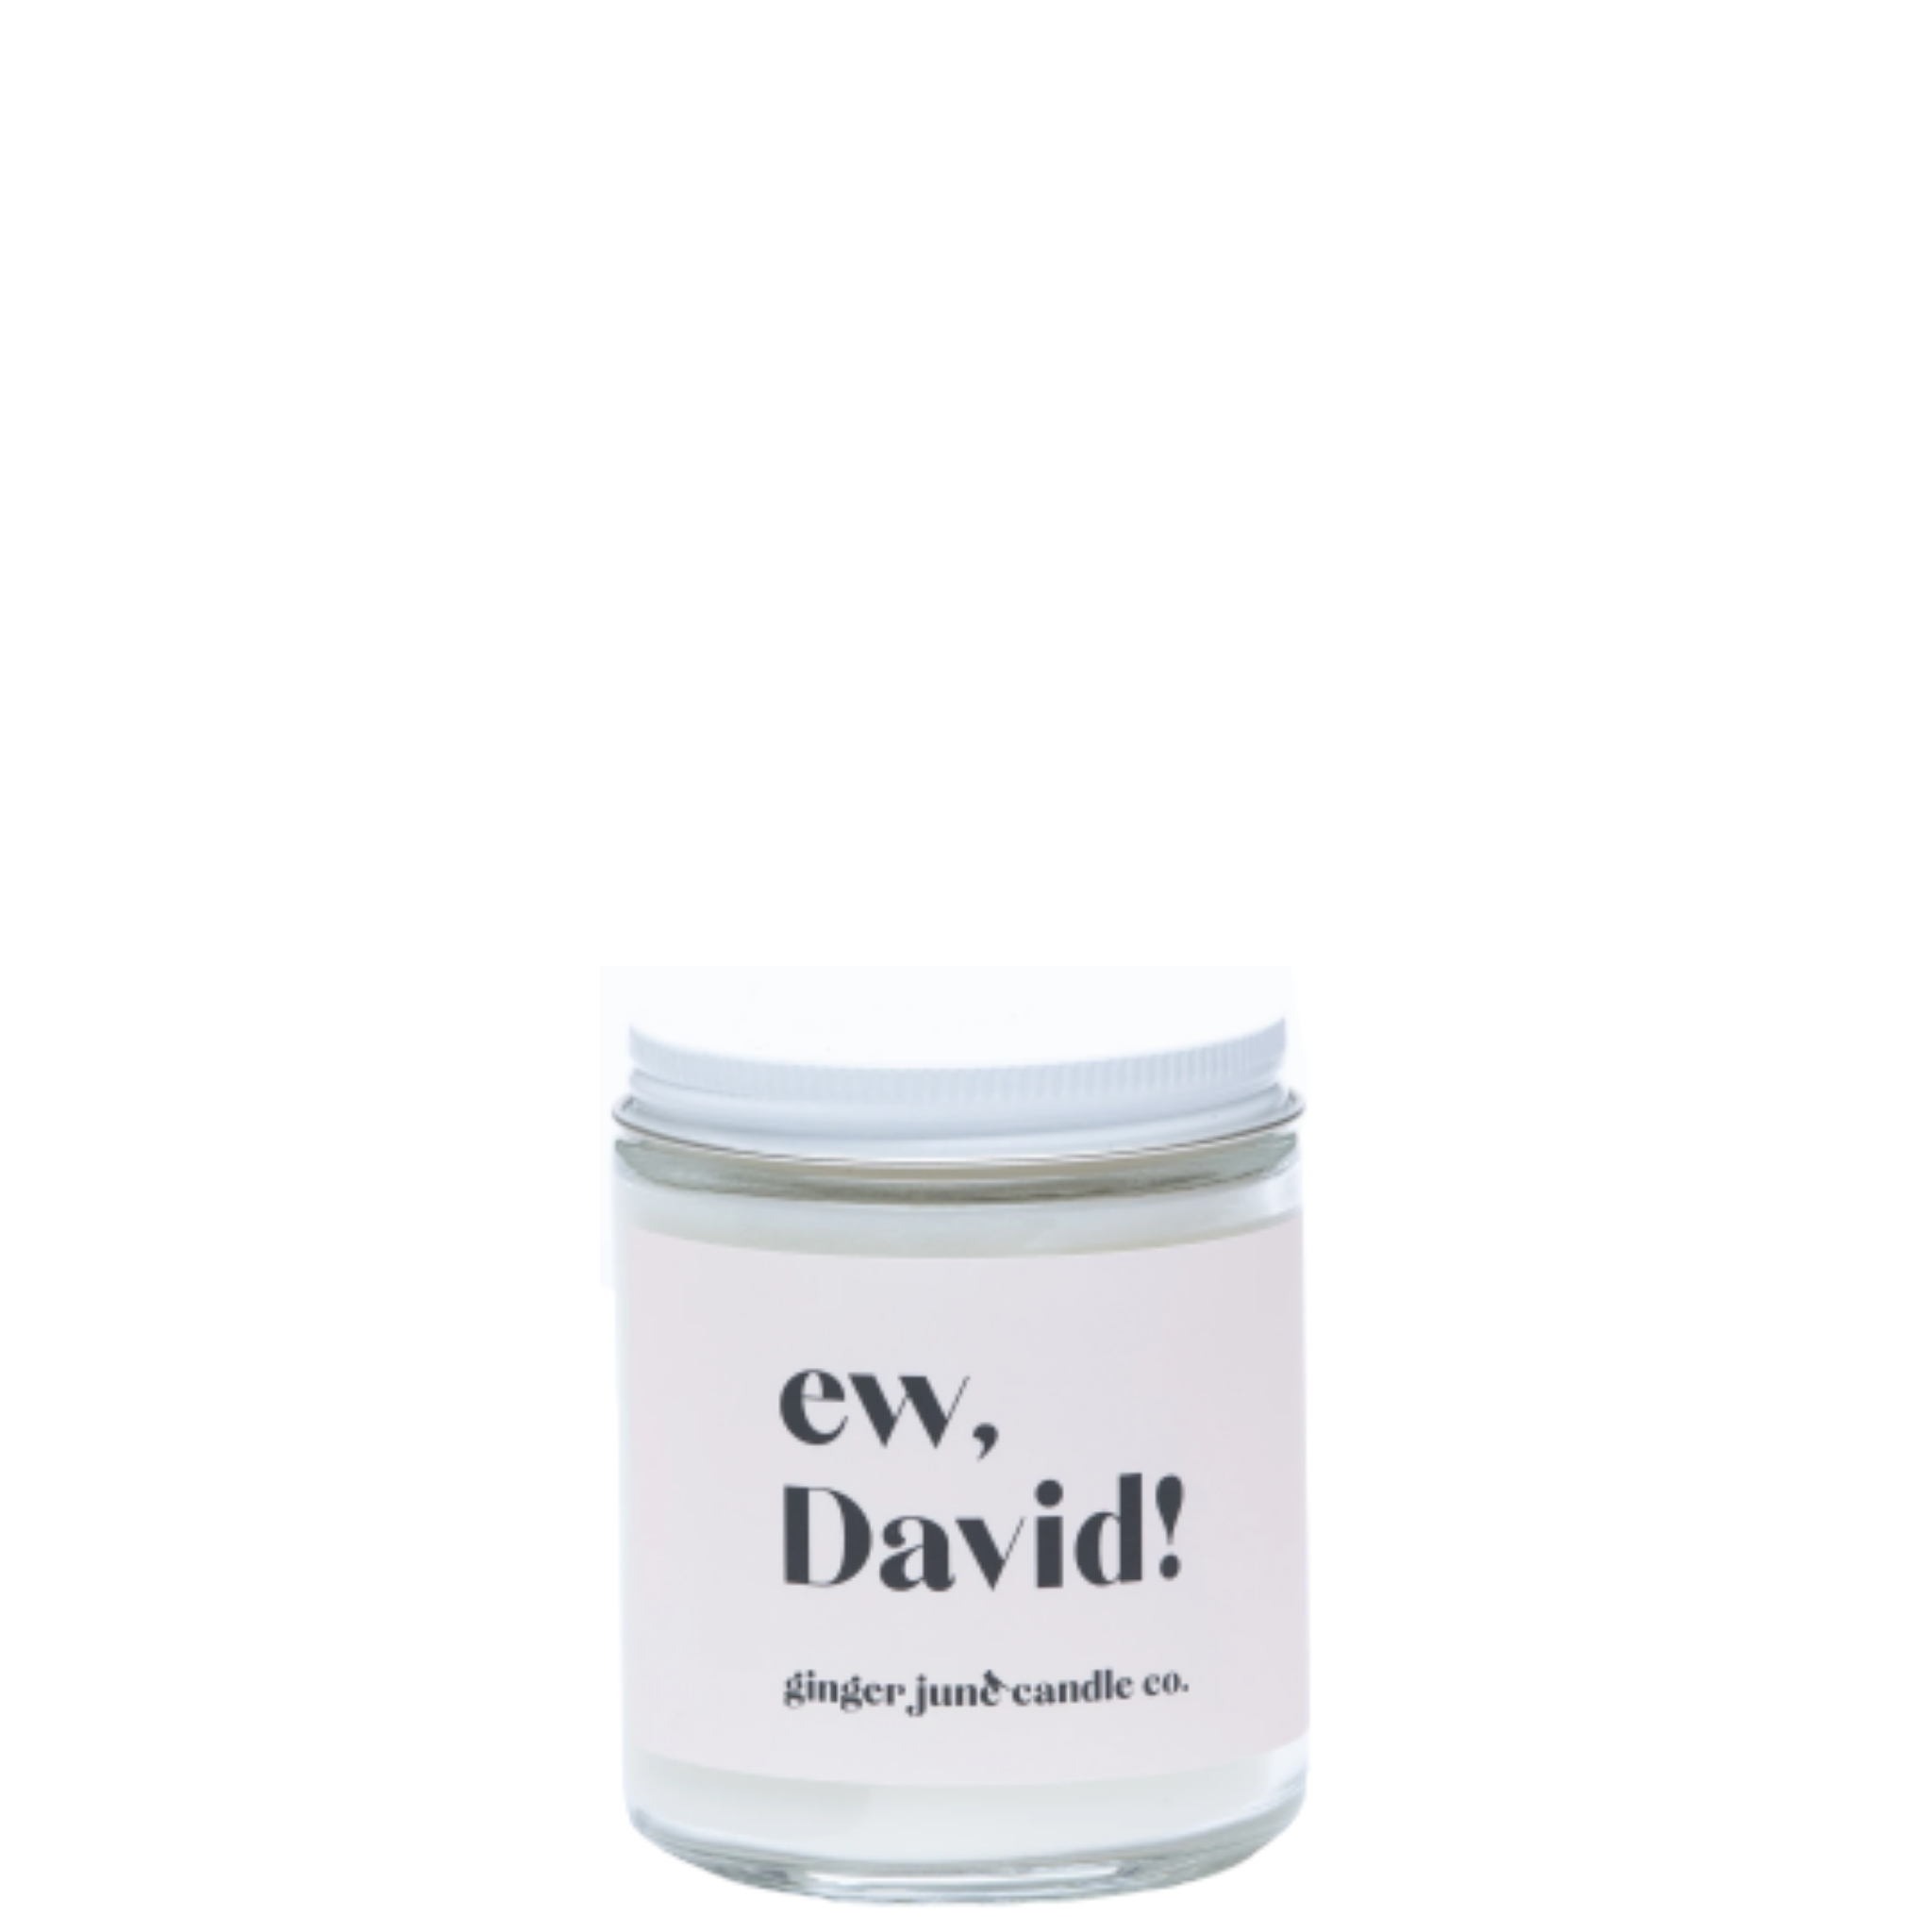 EW DAVID! Non-toxic soy candle Scented: Apricot fig